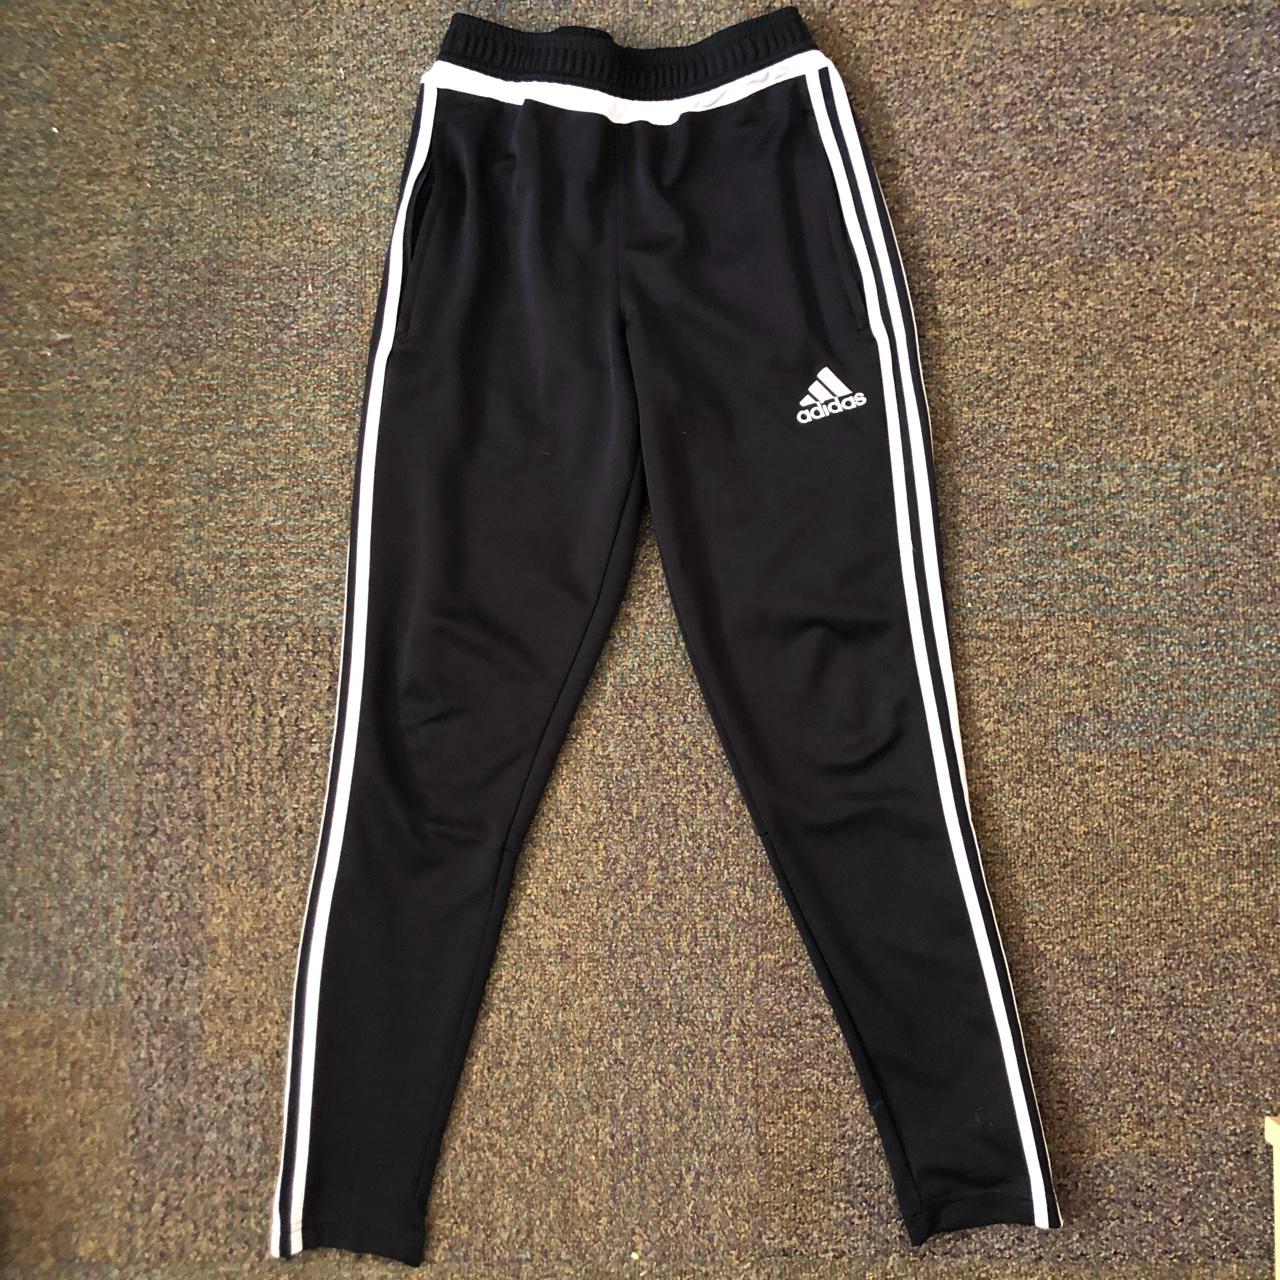 Year 2000 adidas climacool pants no stains or - Depop